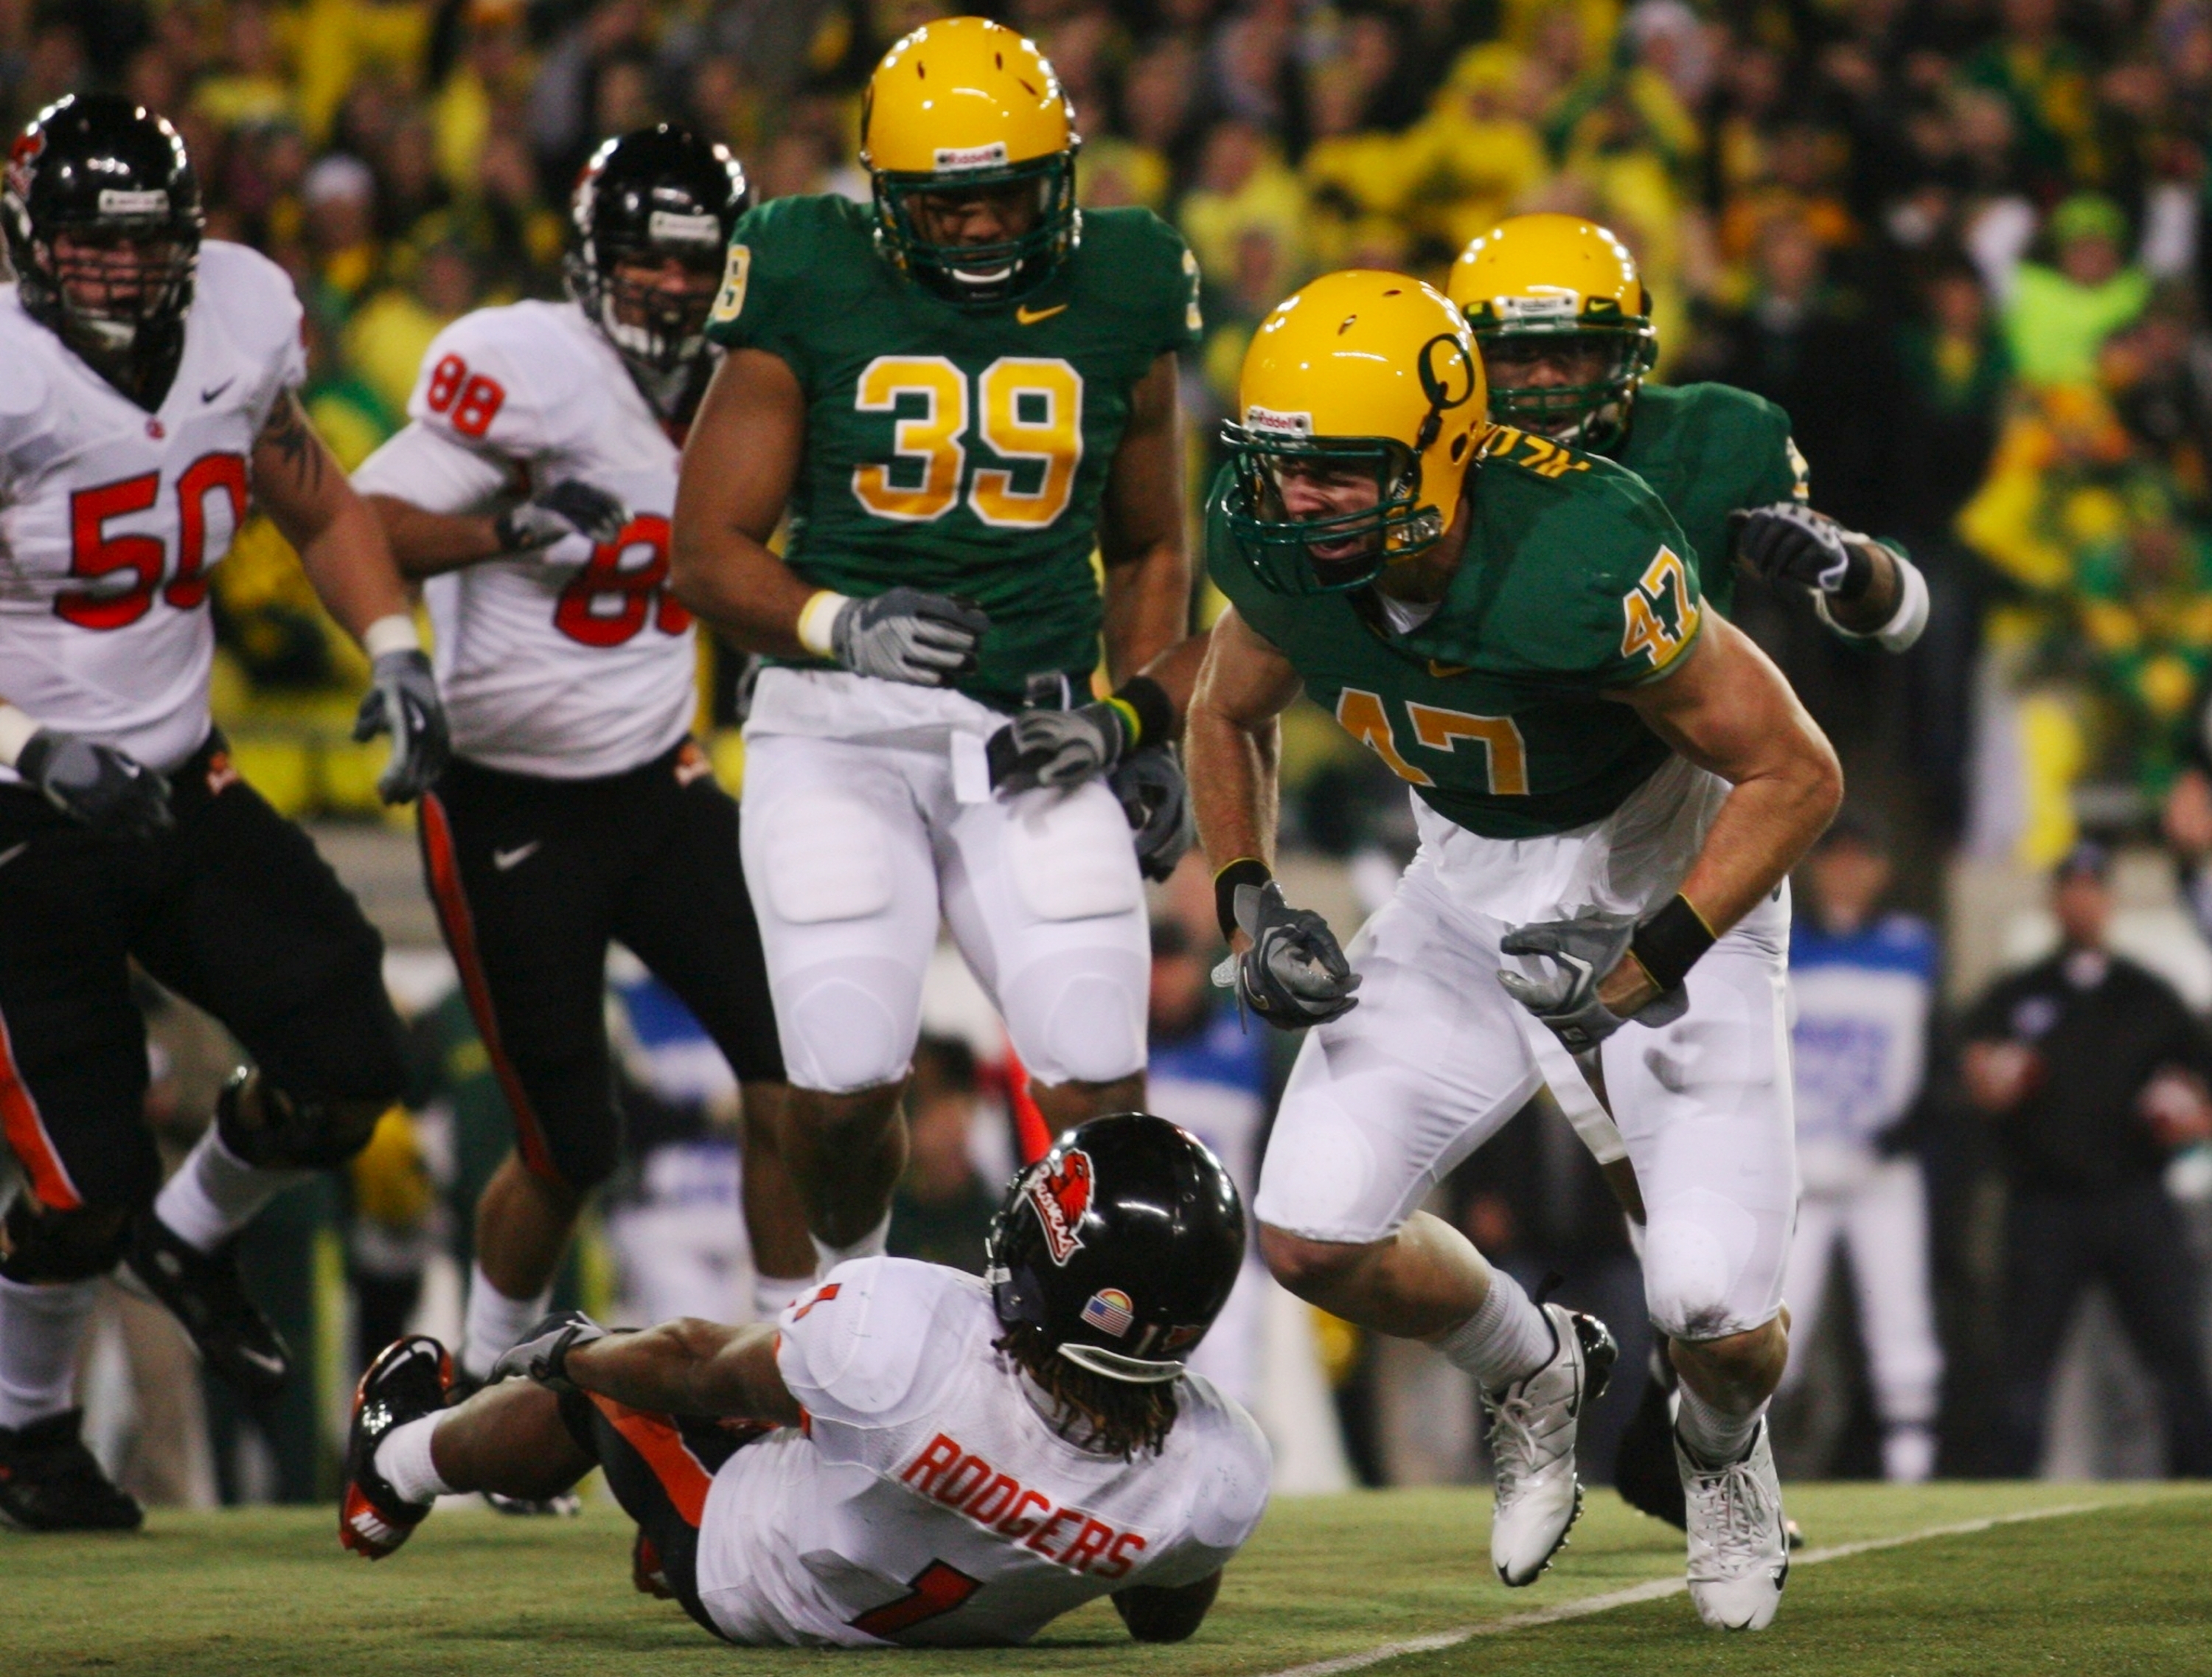 EUGENE,OR - DECEMBER 03:  Kiko Alonso #47 of the Oregon Ducks celebrates tackling Jacquizz Rodgers #1 of the Oregon State Beavers during the second quarter of the game at Autzen Stadium on December 3, 2009 in Eugene, Oregon.  (Photo by Tom Hauck/Getty Ima